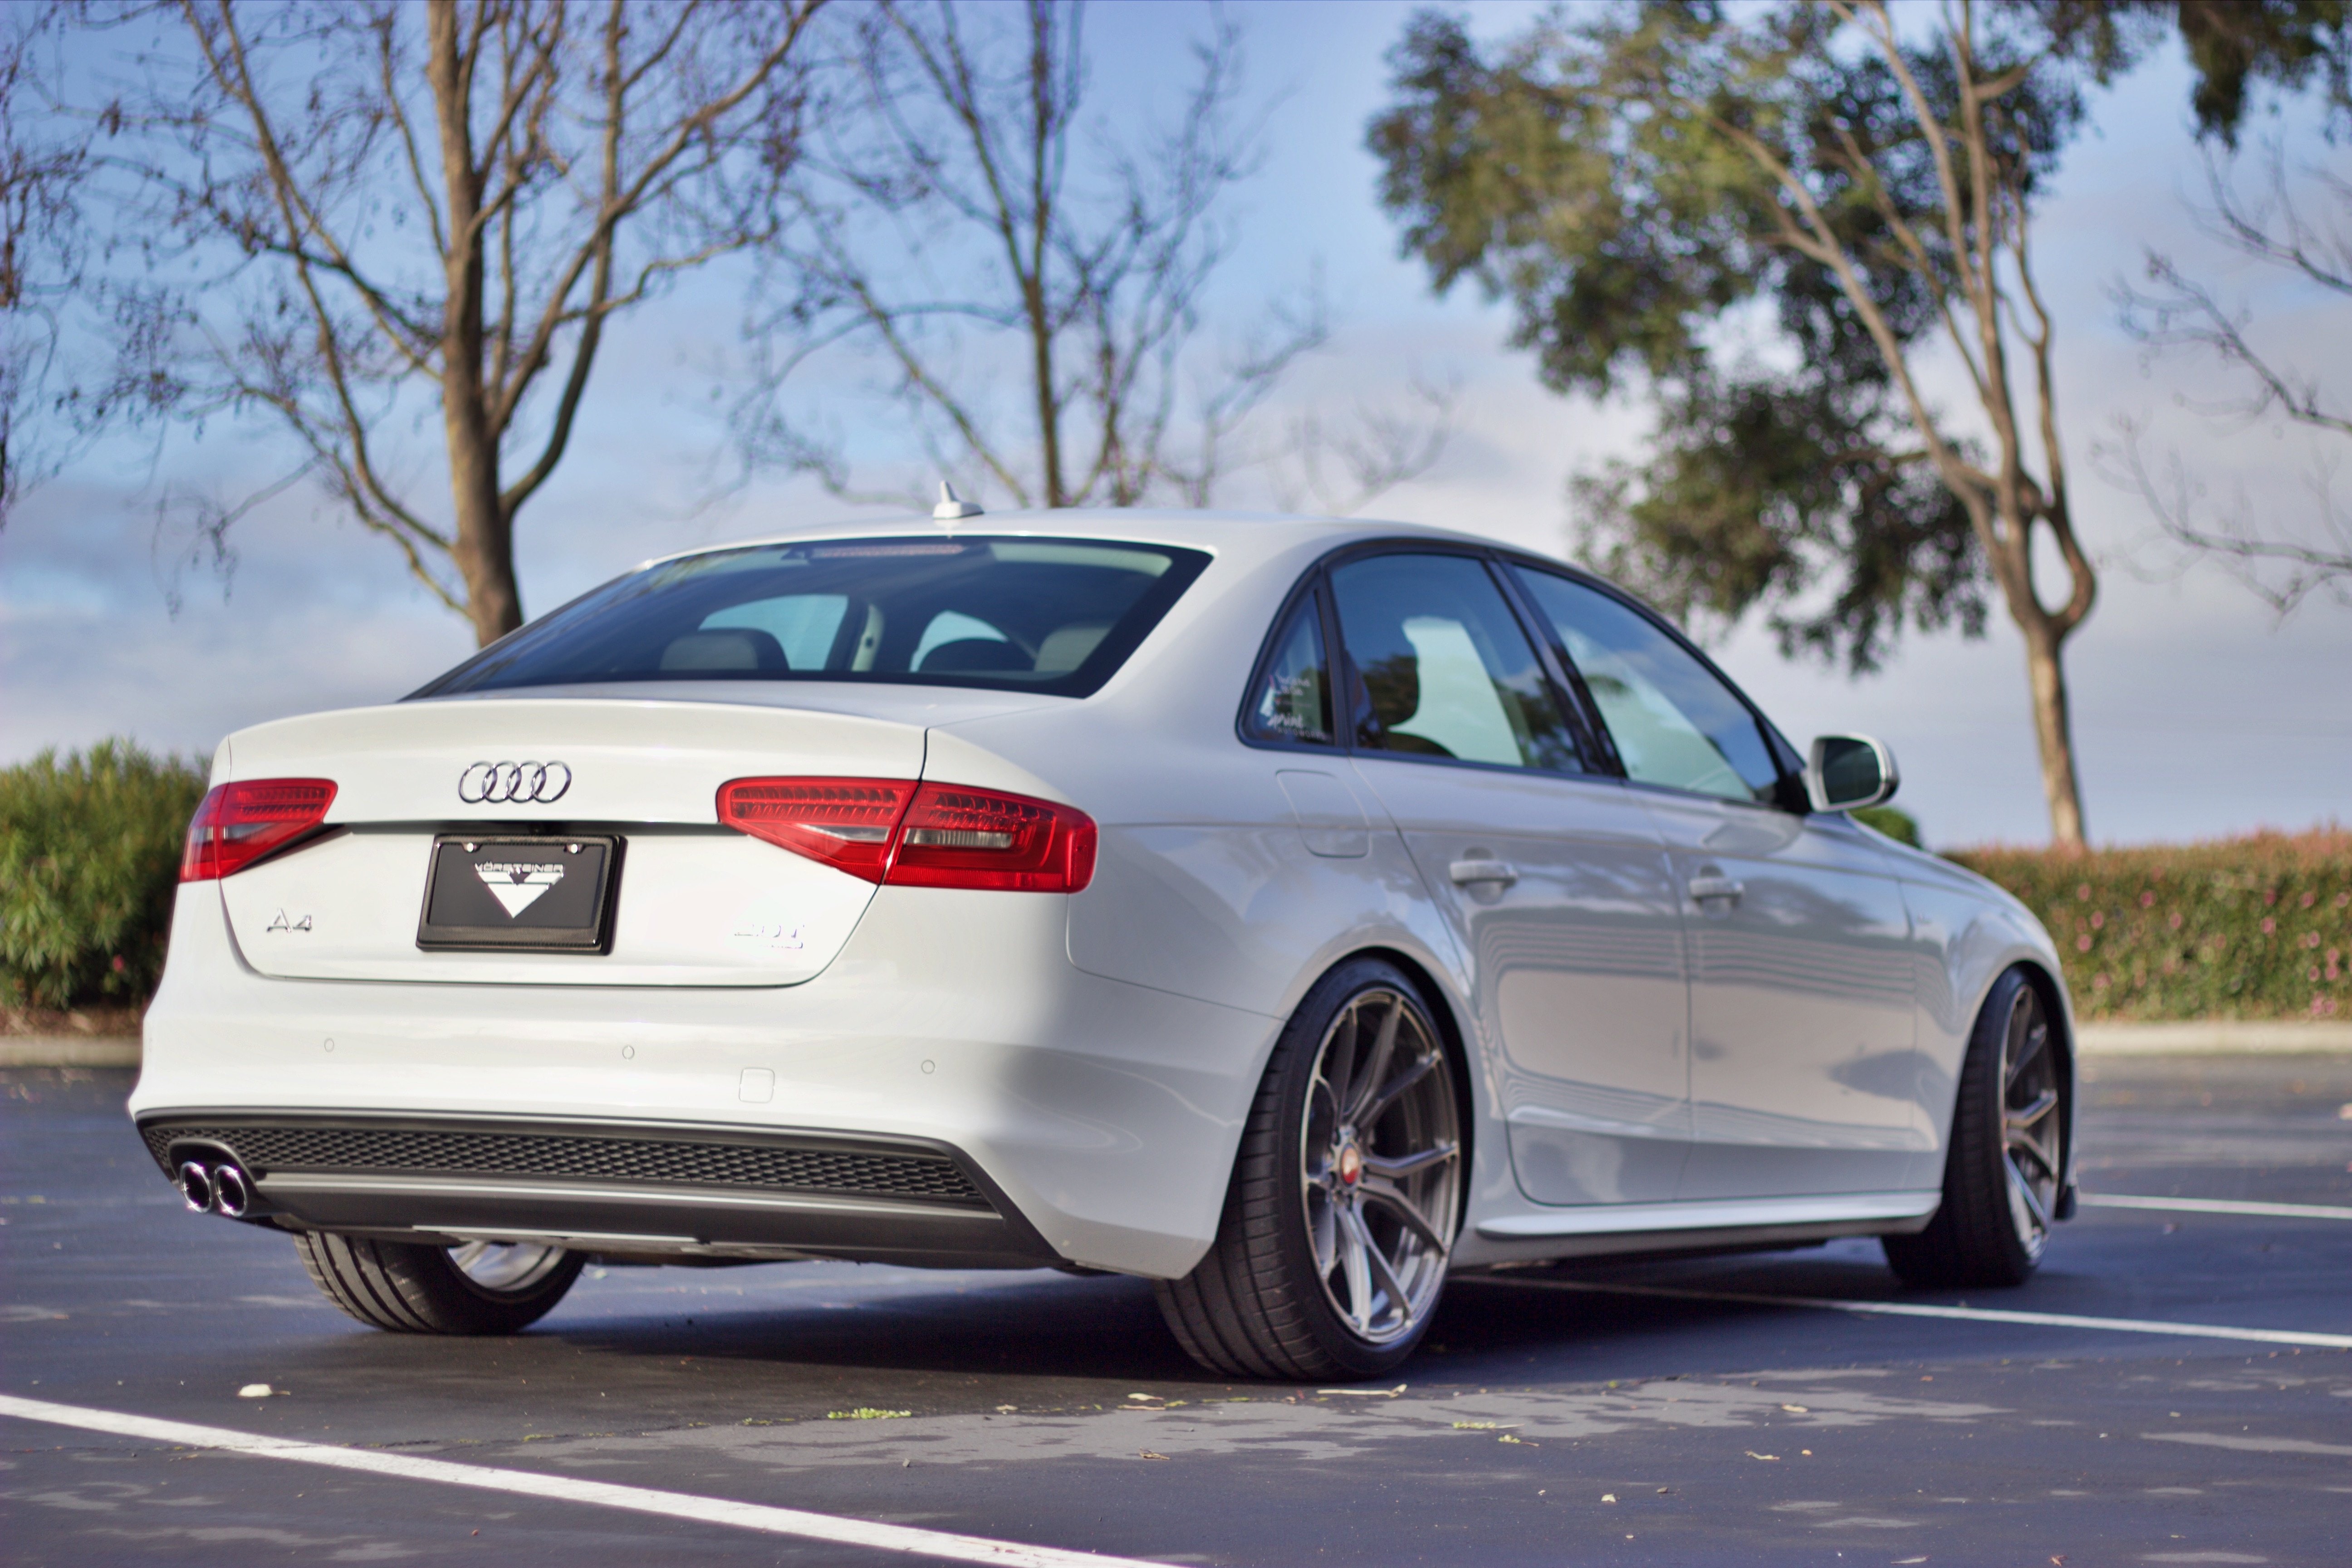 Custom Rear Diffuser on White Audi A4 - Photo by Vossen